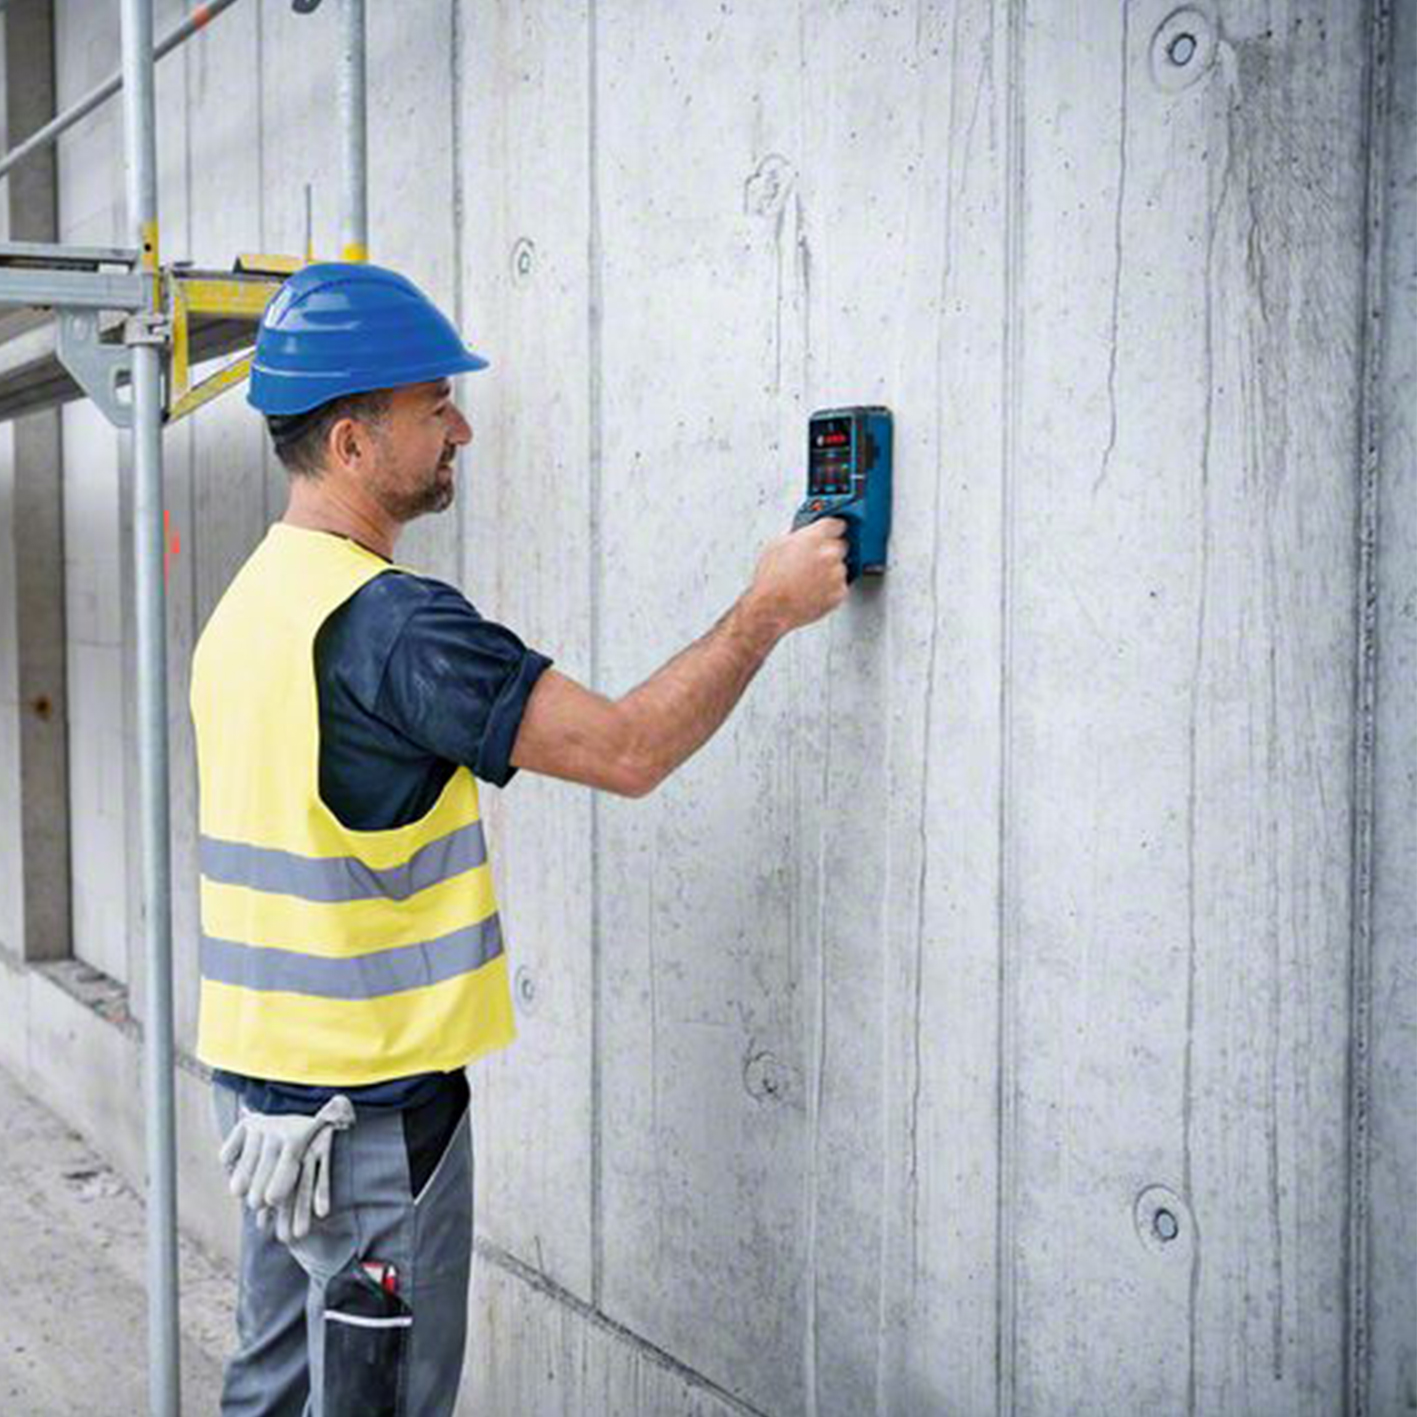 Bosch D-TECT 200 C Professional Wall Scanner/ Universal Detector available at the Blea Store